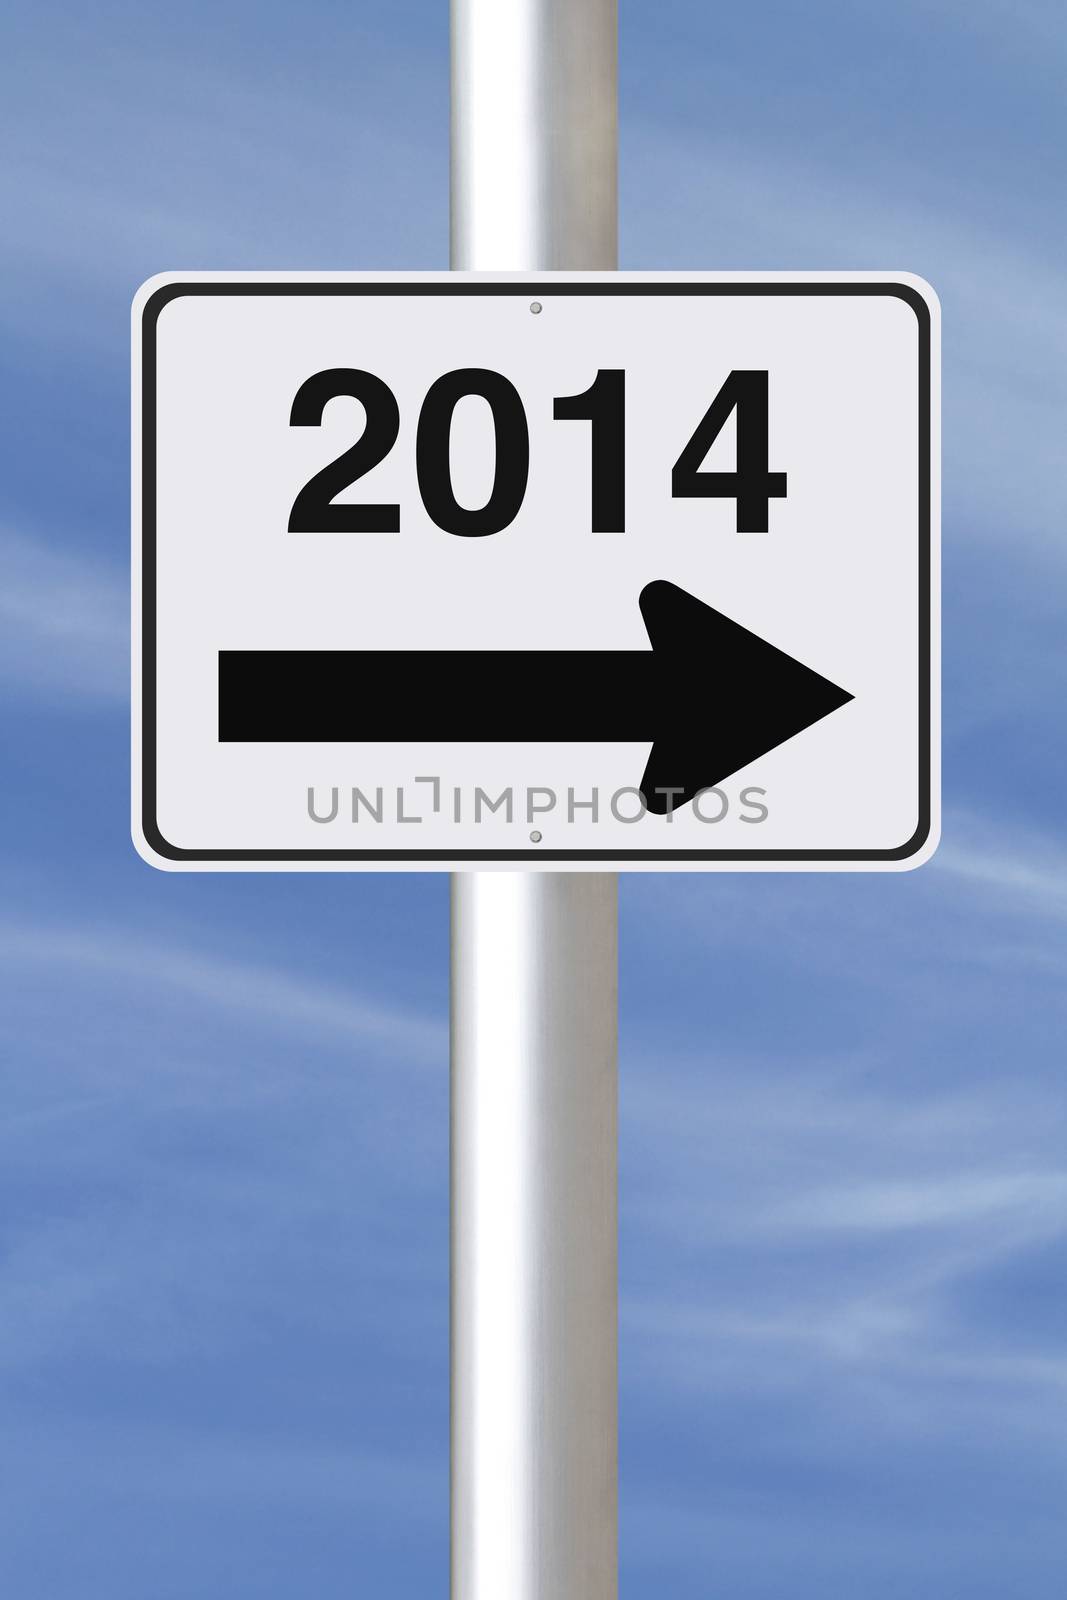 A modified one way street sign on the new year 2014